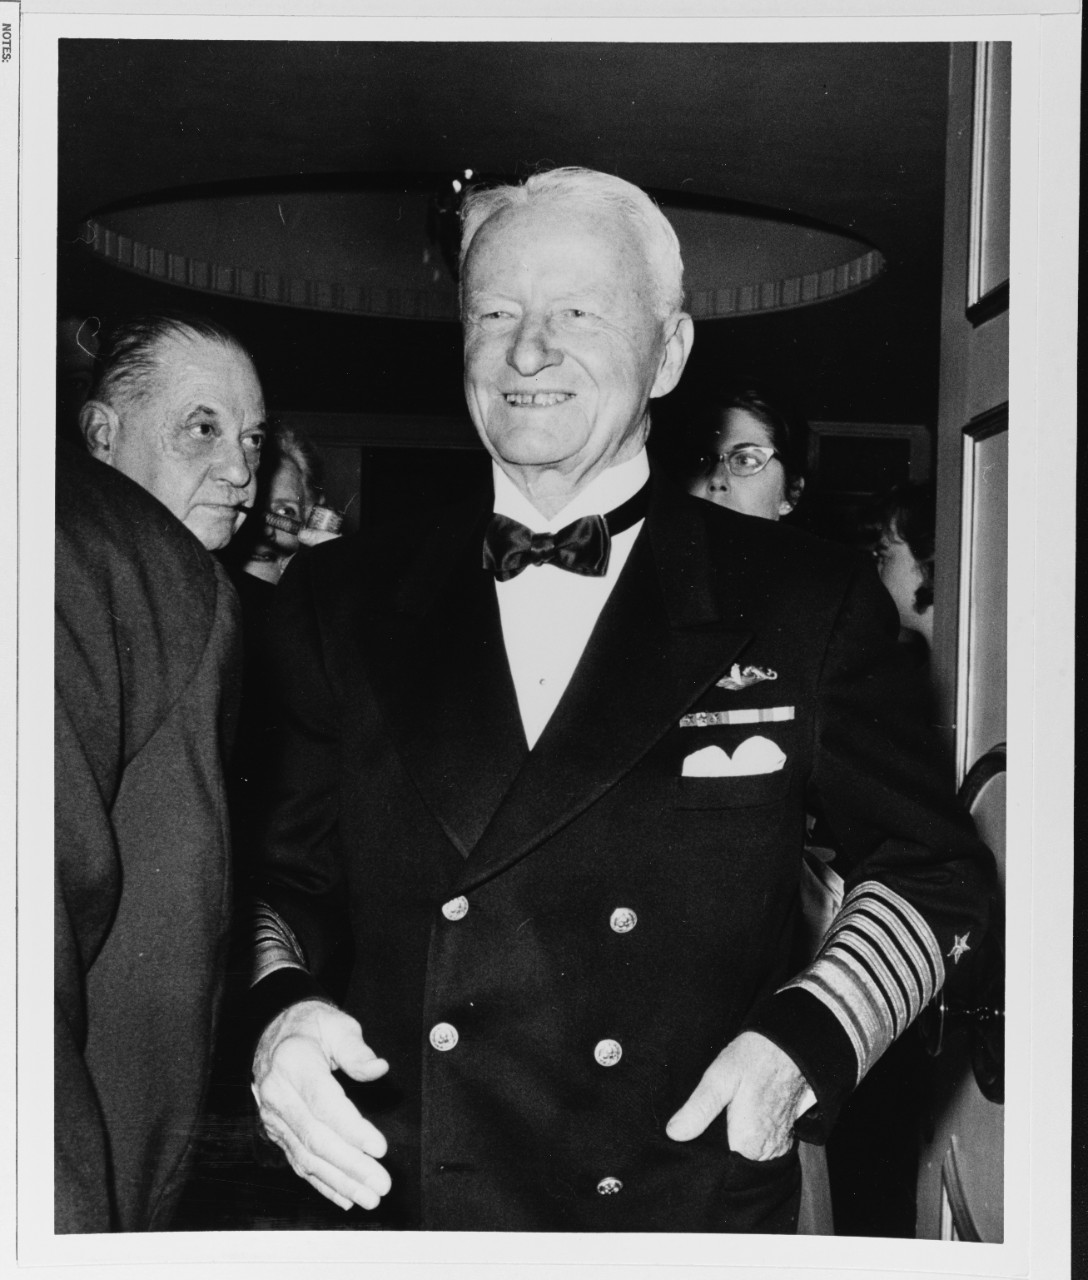 Fleet Admiral Nimitz Attends the 25th Anniversary Dinner of the Research Institute of America